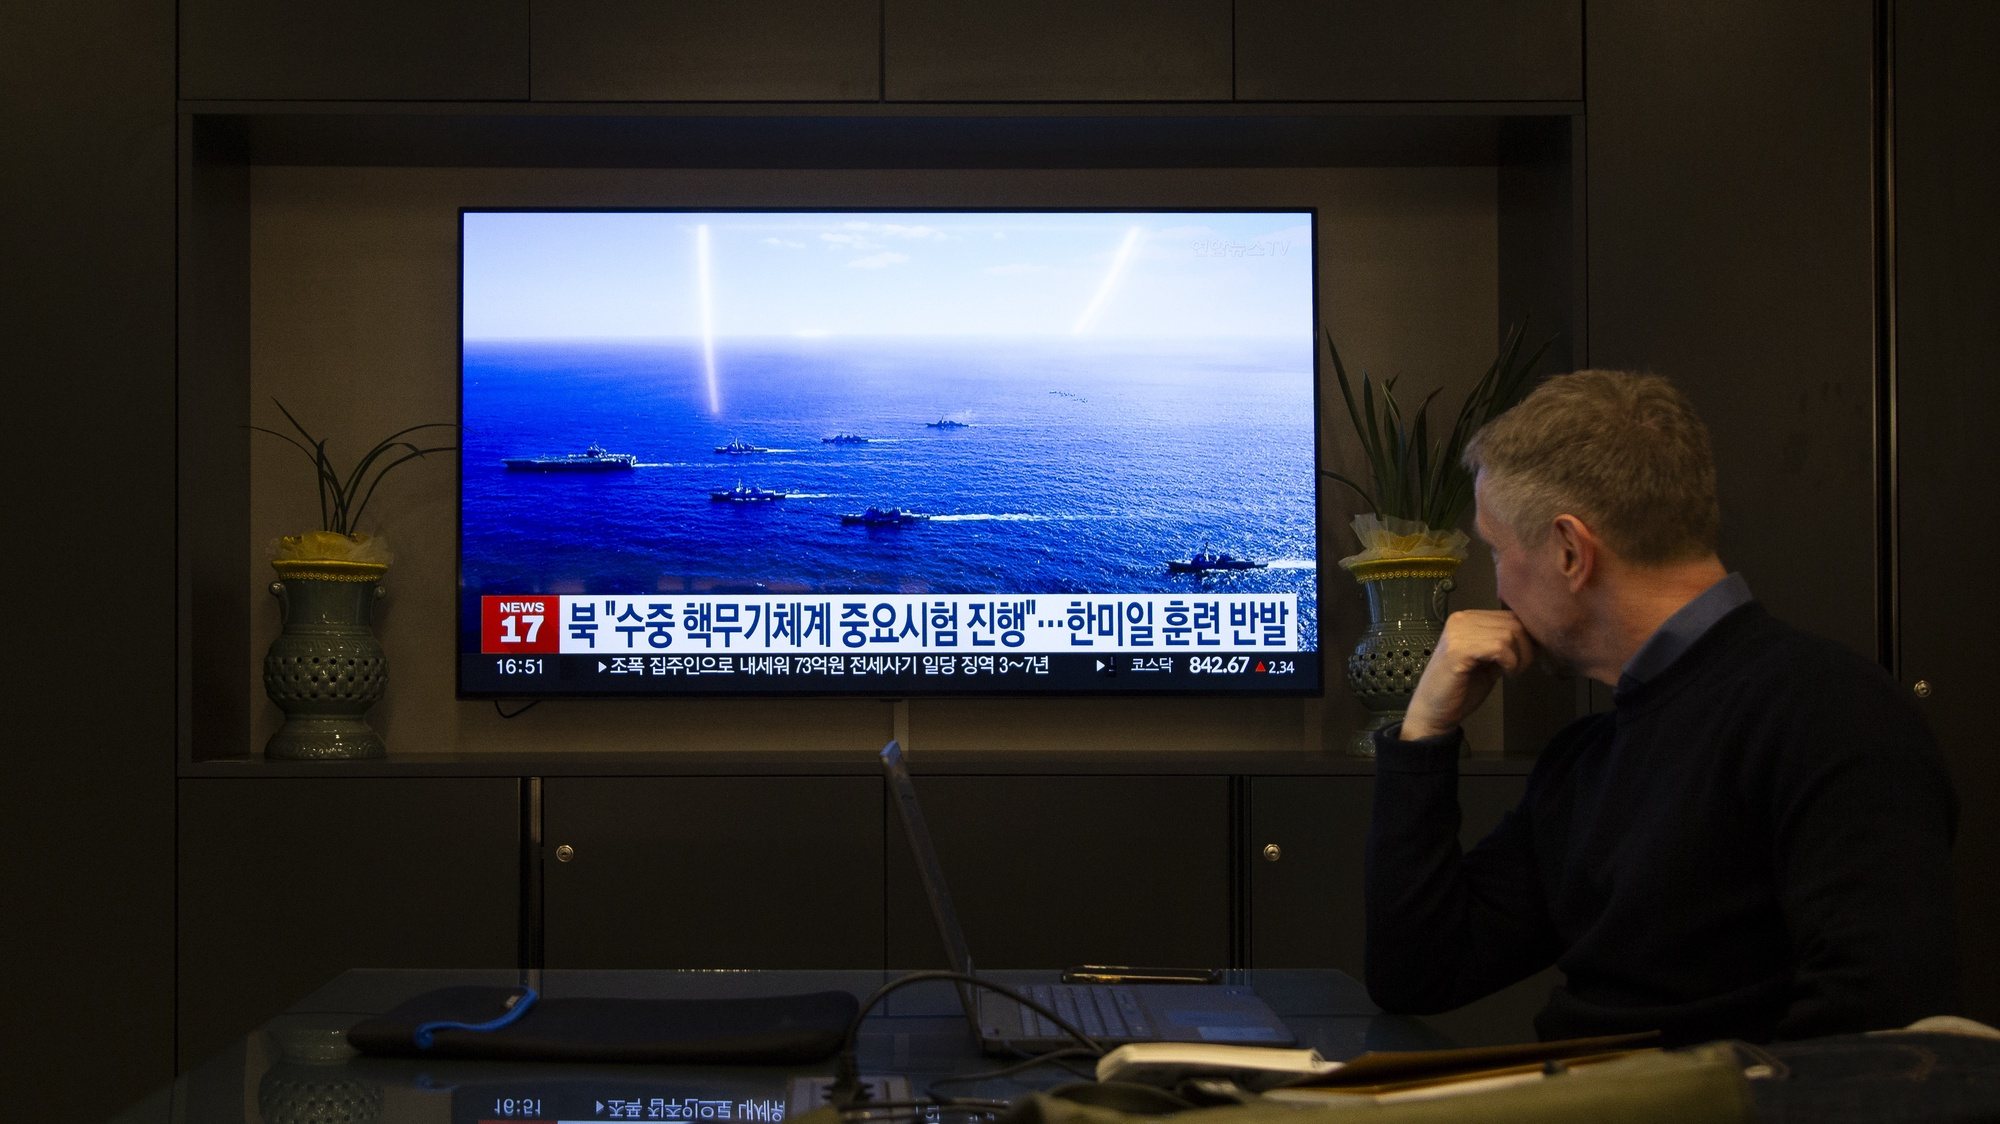 epa11089138 A foreign journalist watches the news on a TV at an office in Seoul, South Korea, 19 January 2024. North Korean state media said on 19 January that the North has tested in the East Sea an underwater nuclear weapon system under development, the &#039;Haeil-5-23&#039;, in response to this week&#039;s joint maritime exercises involving South Korea, the USA and Japan. KCNA did not disclose the test date and the weapons&#039;s specifications.  EPA/JEON HEON-KYUN